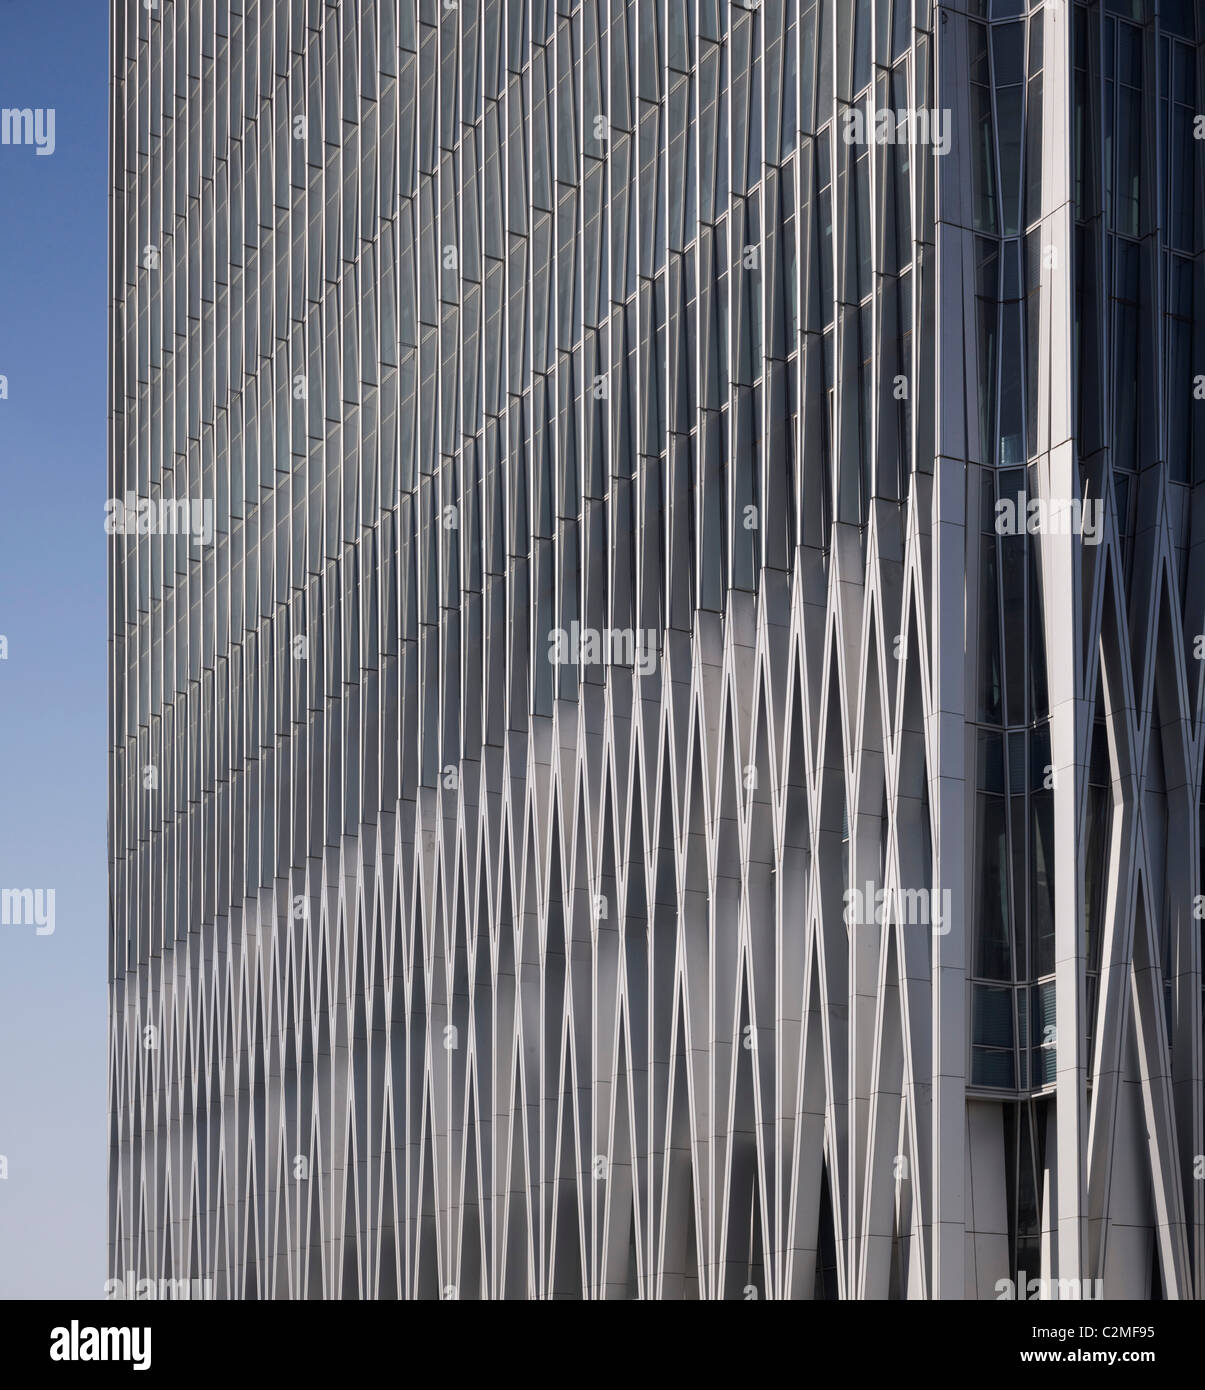 China World Trade Center 3, Beijing, Chine. Banque D'Images